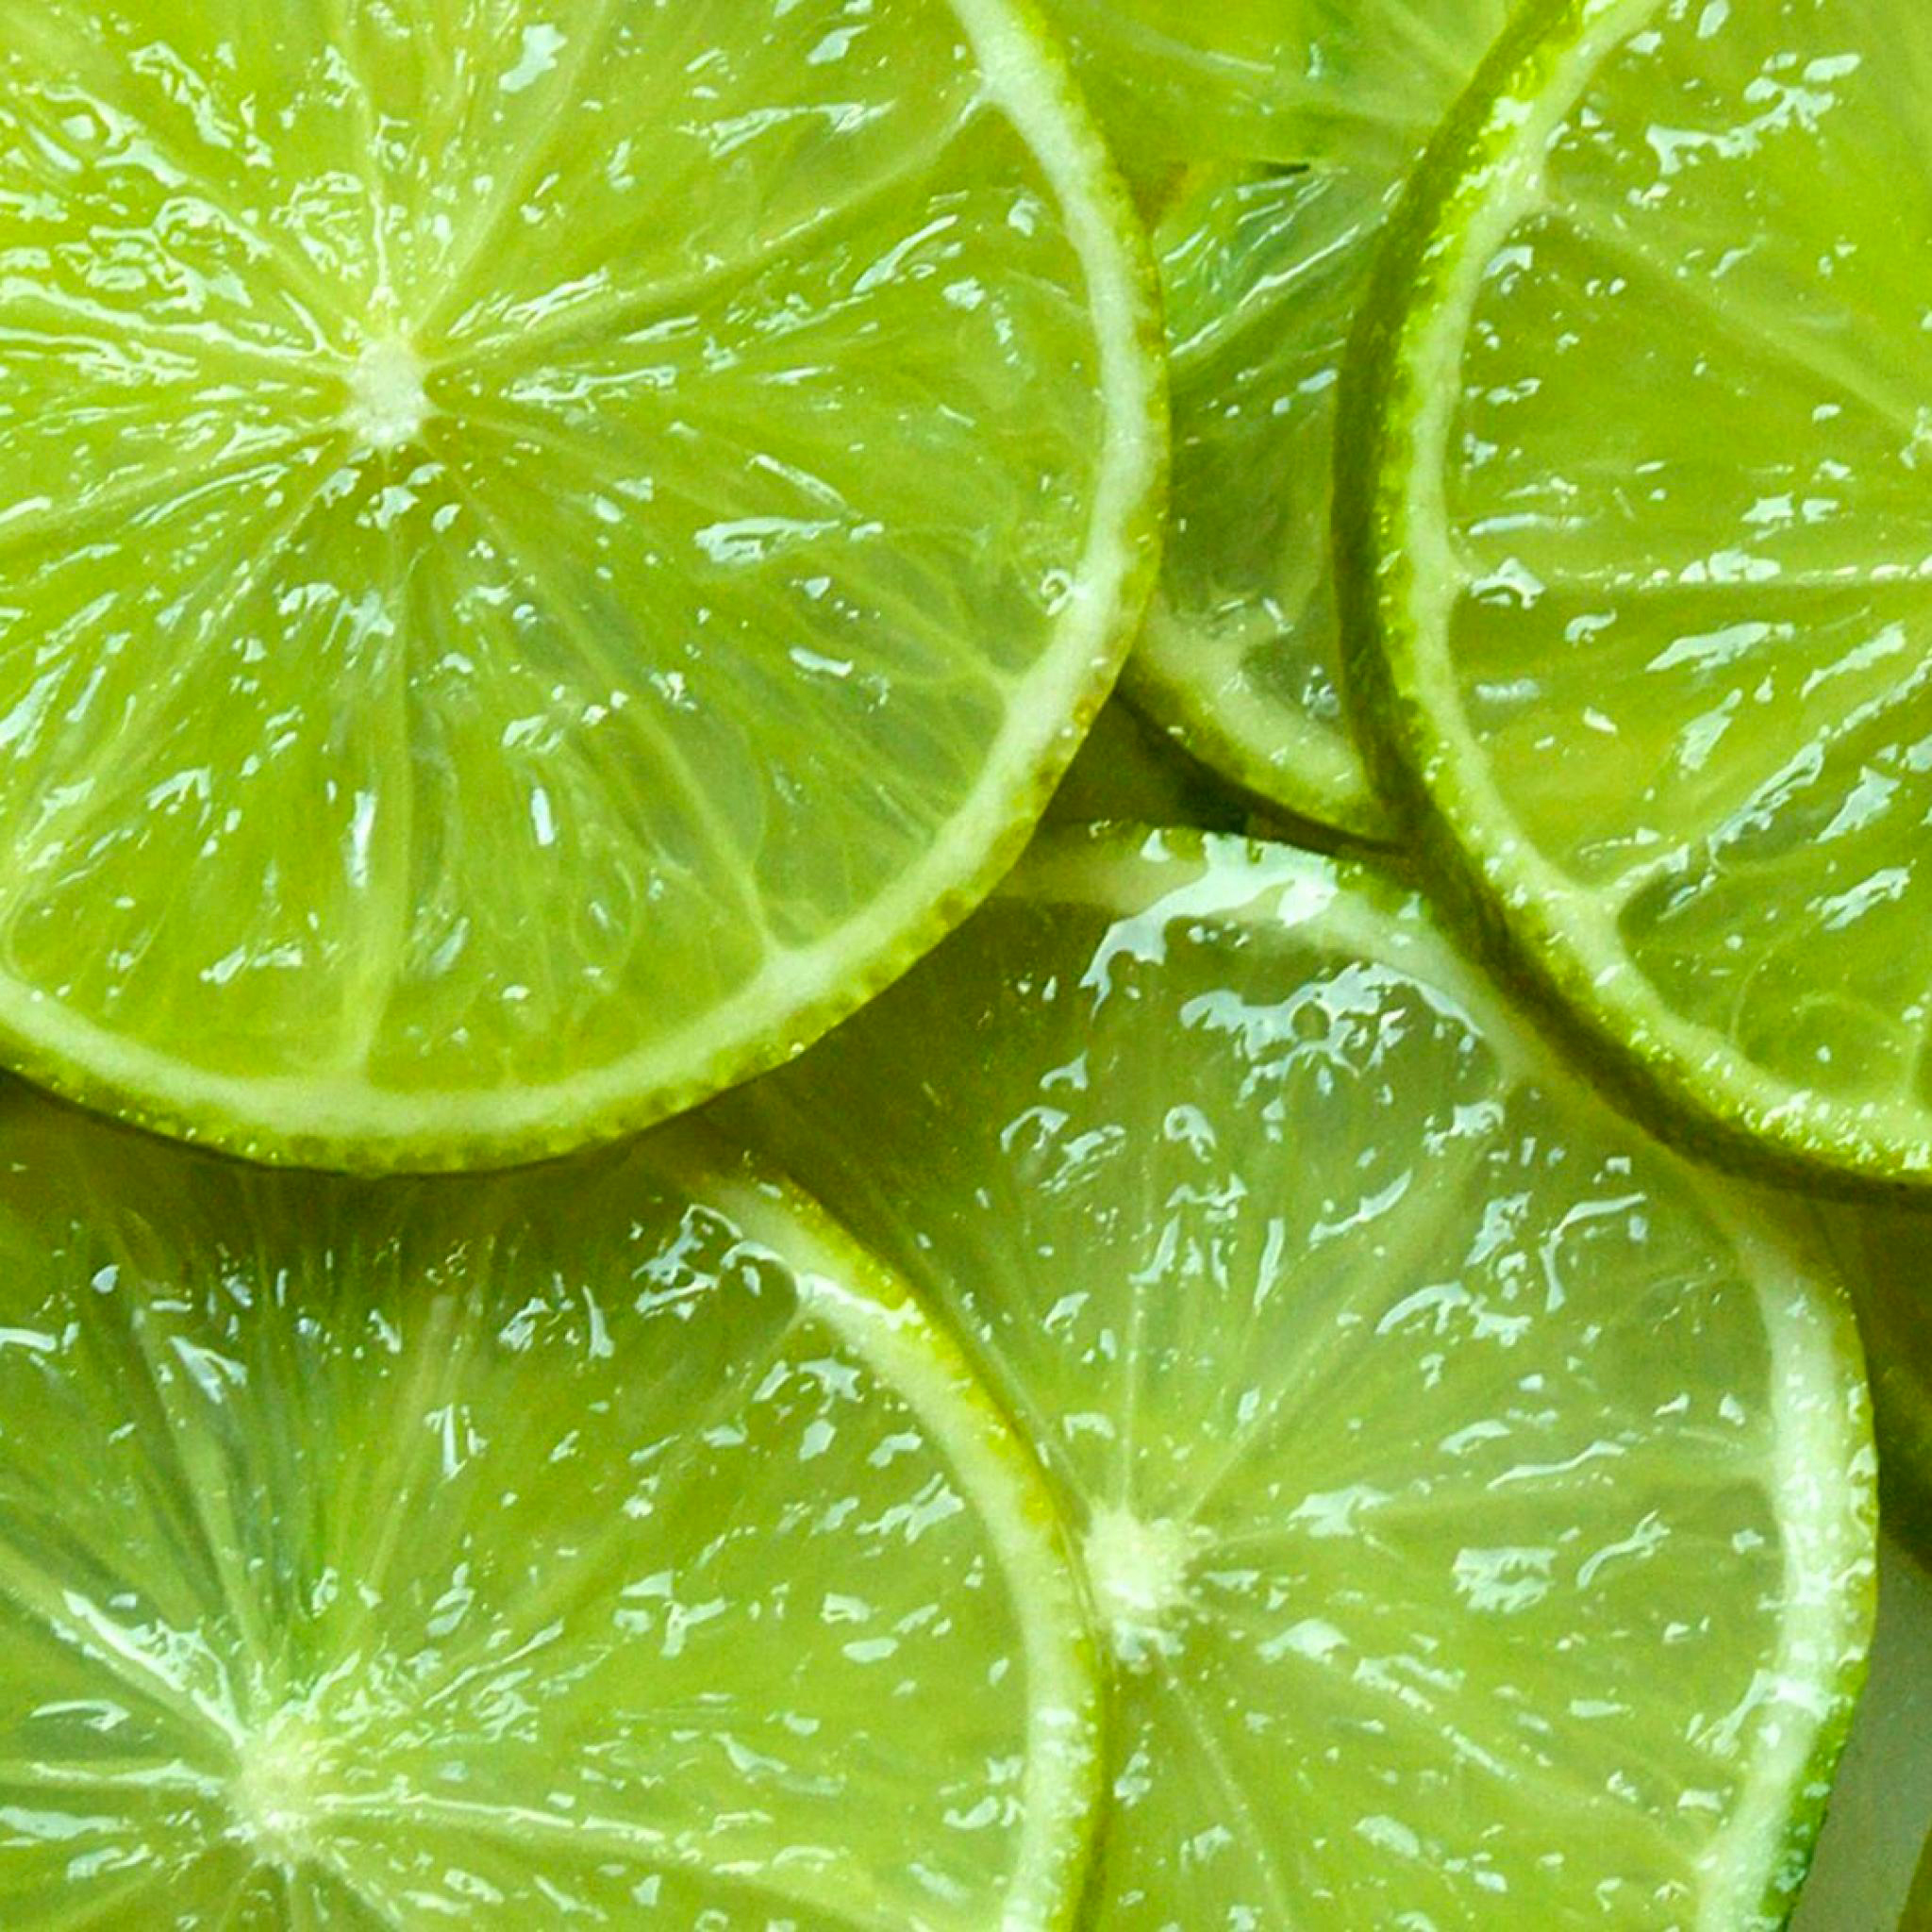 Green Limes Retina Wallpaper for iPhone Pro Max, X, 6